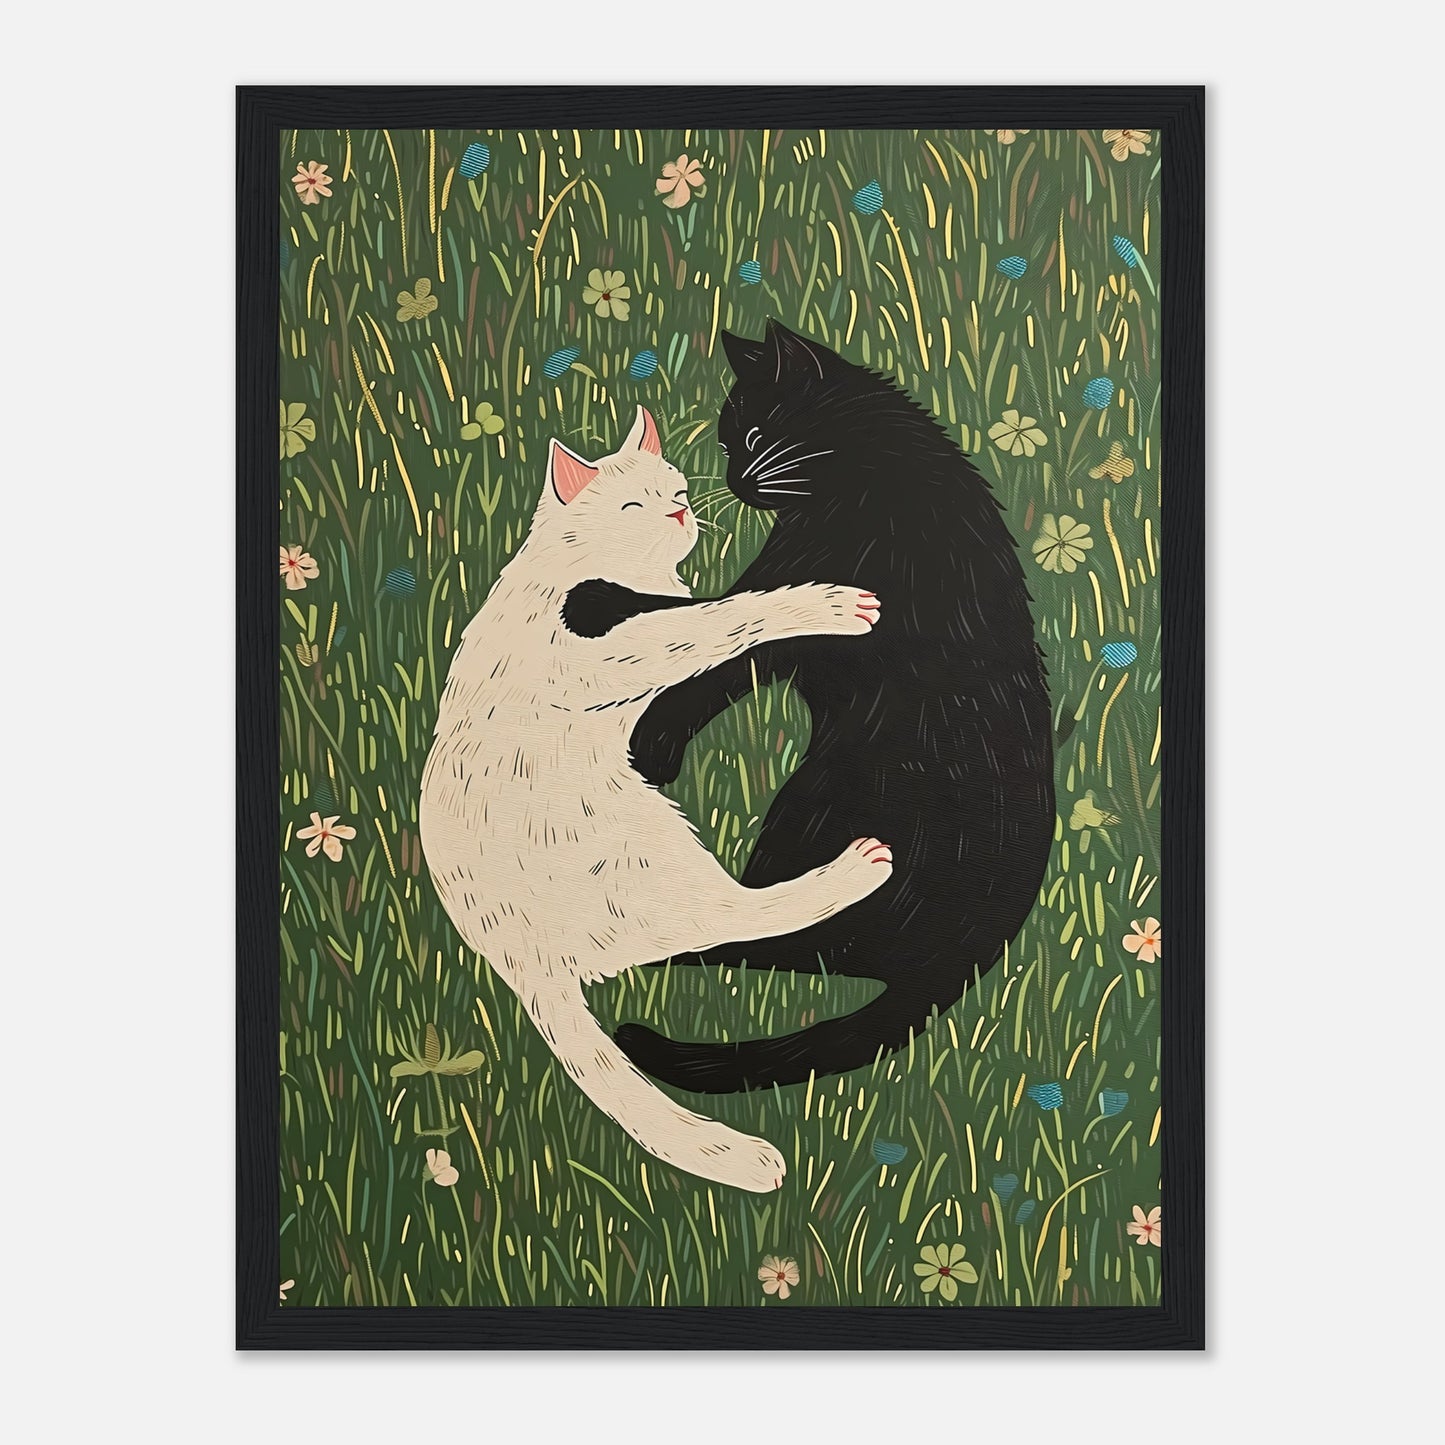 A painting of a white and a black cat hugging each other in a field of flowers.